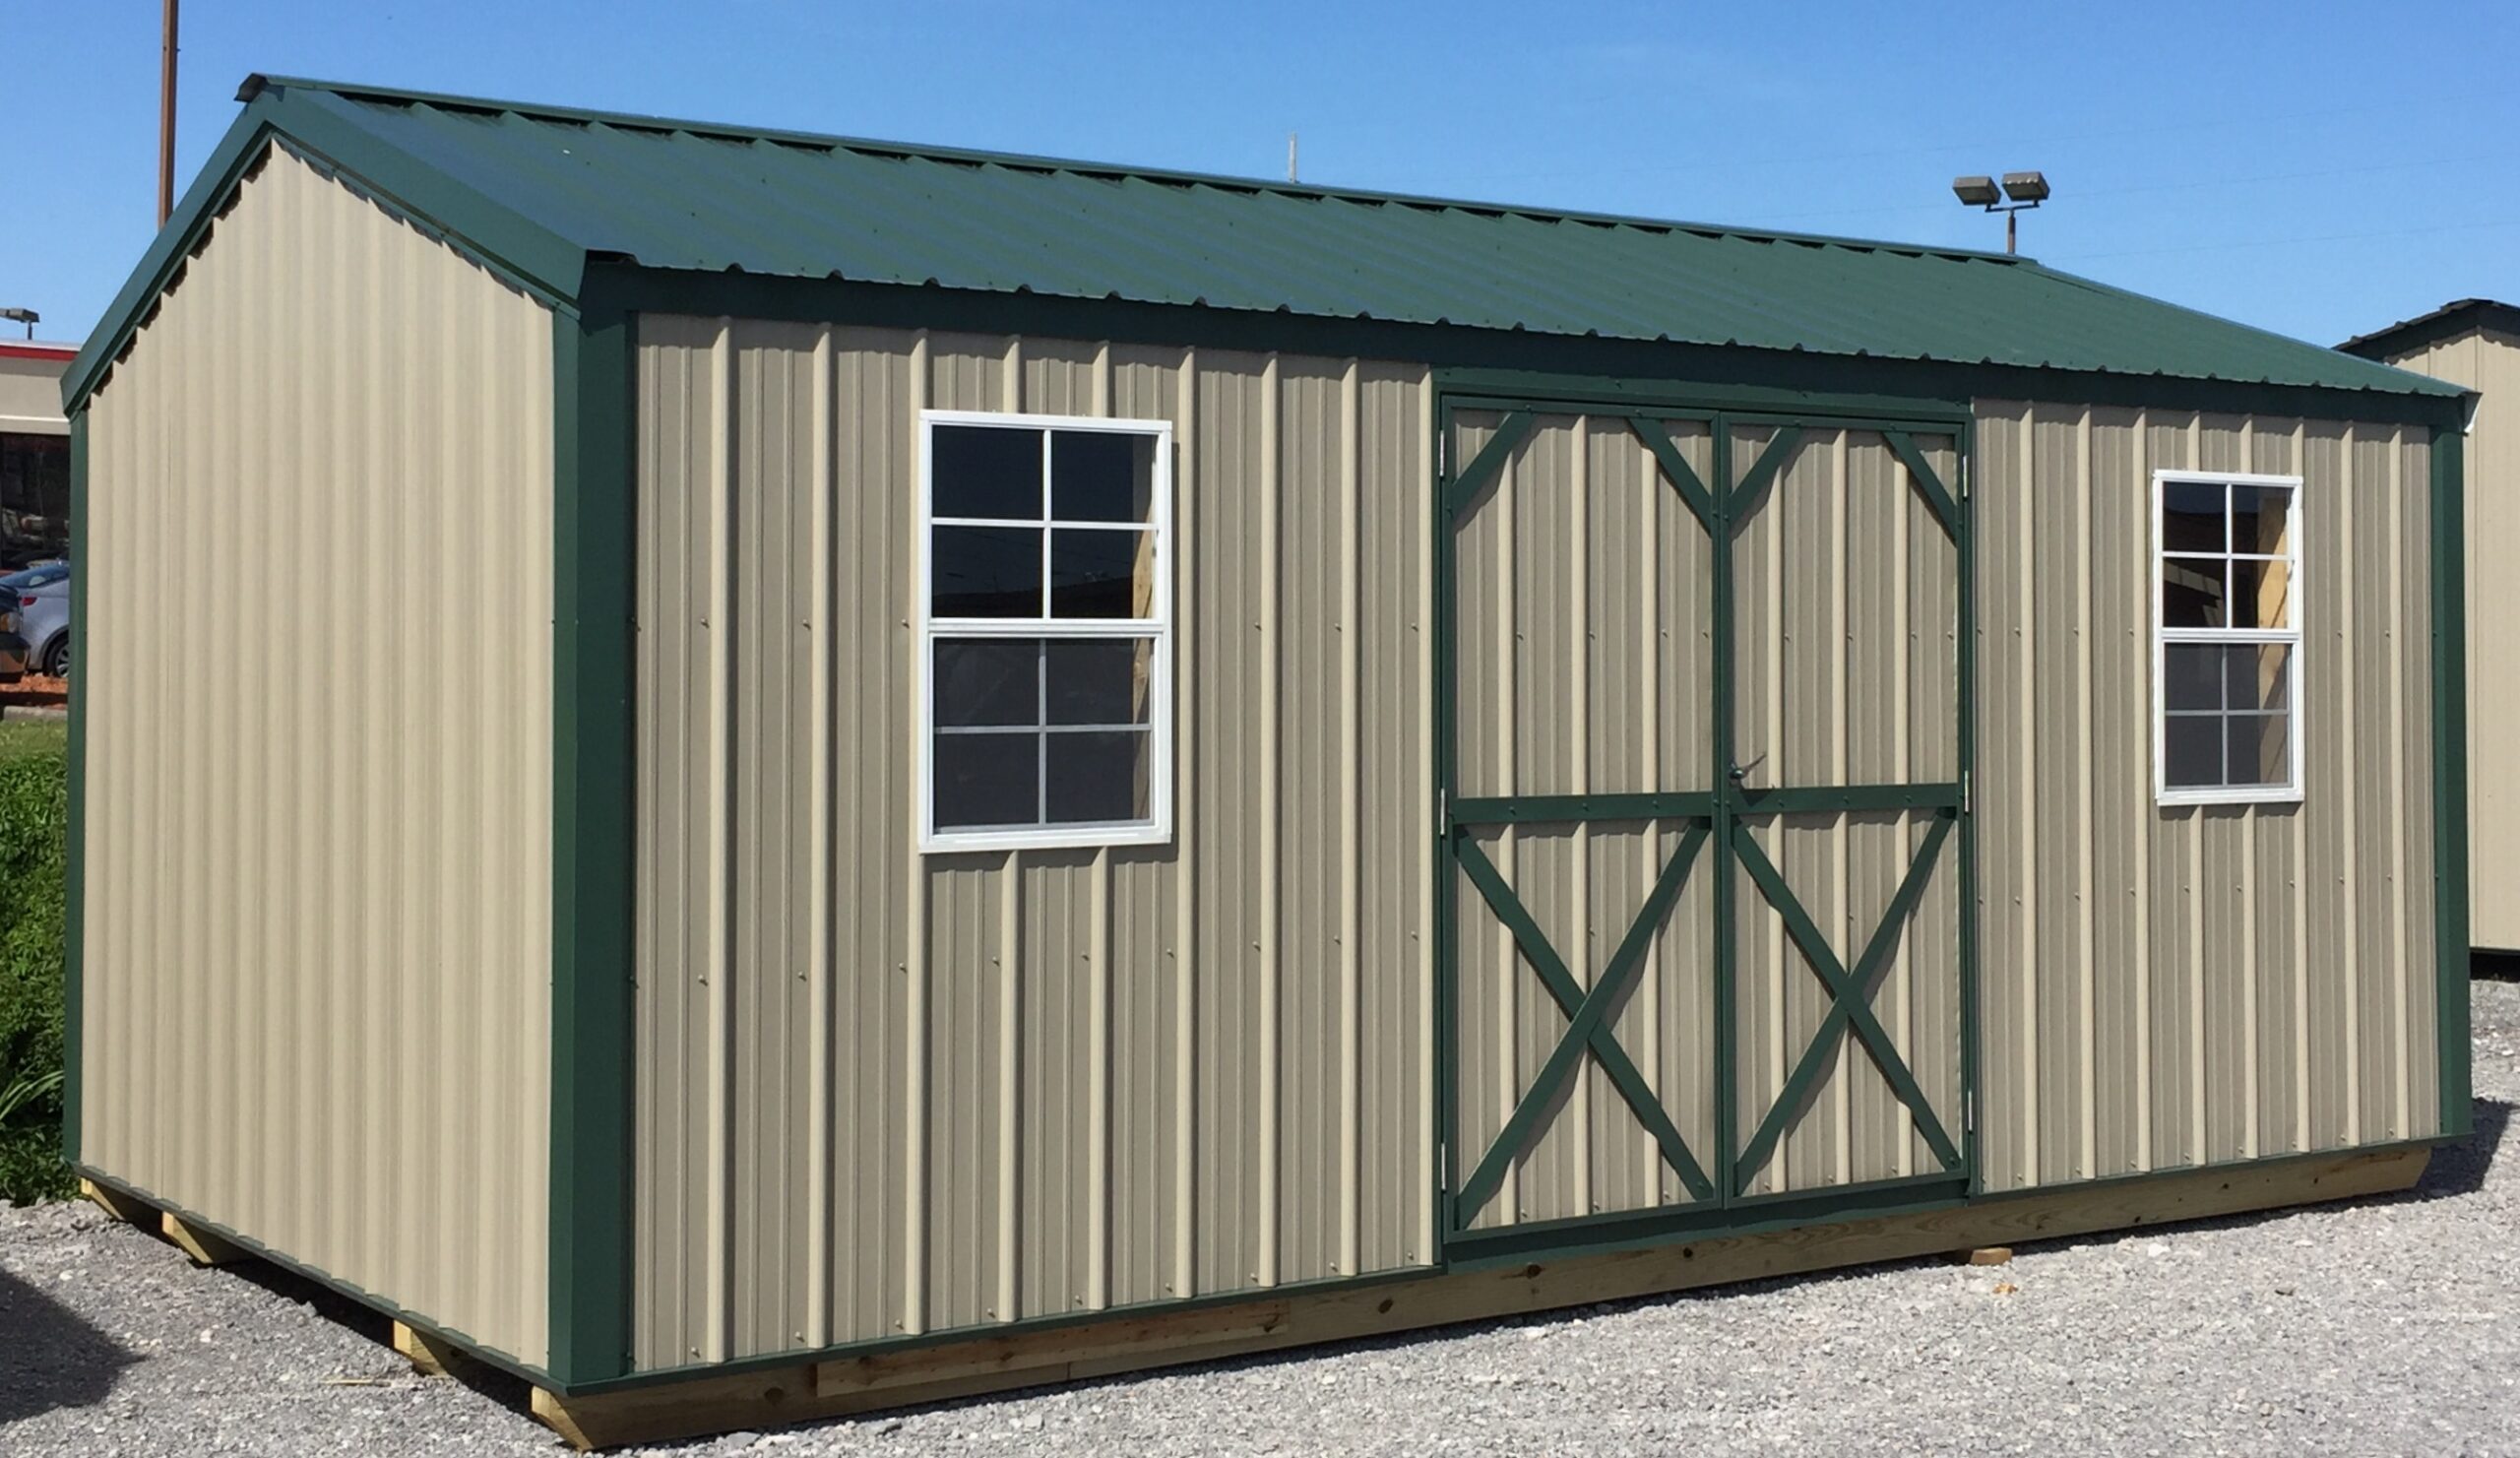 Tan metal garden shed with green trim and roof